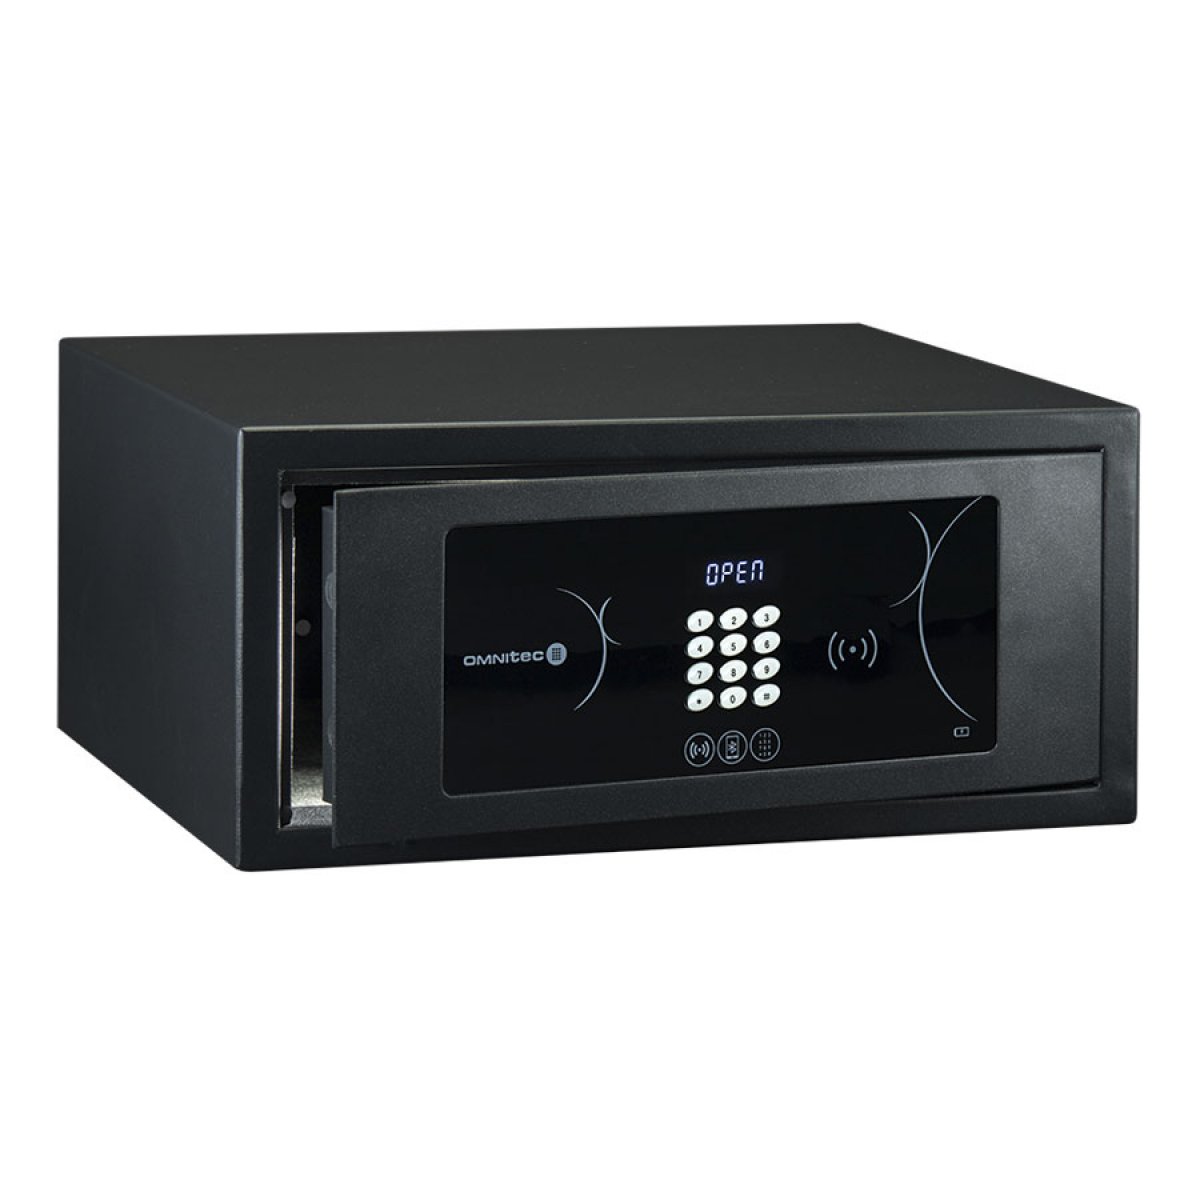 Hotel Safe operates by code, Bluetooth and RFID tag EXO 